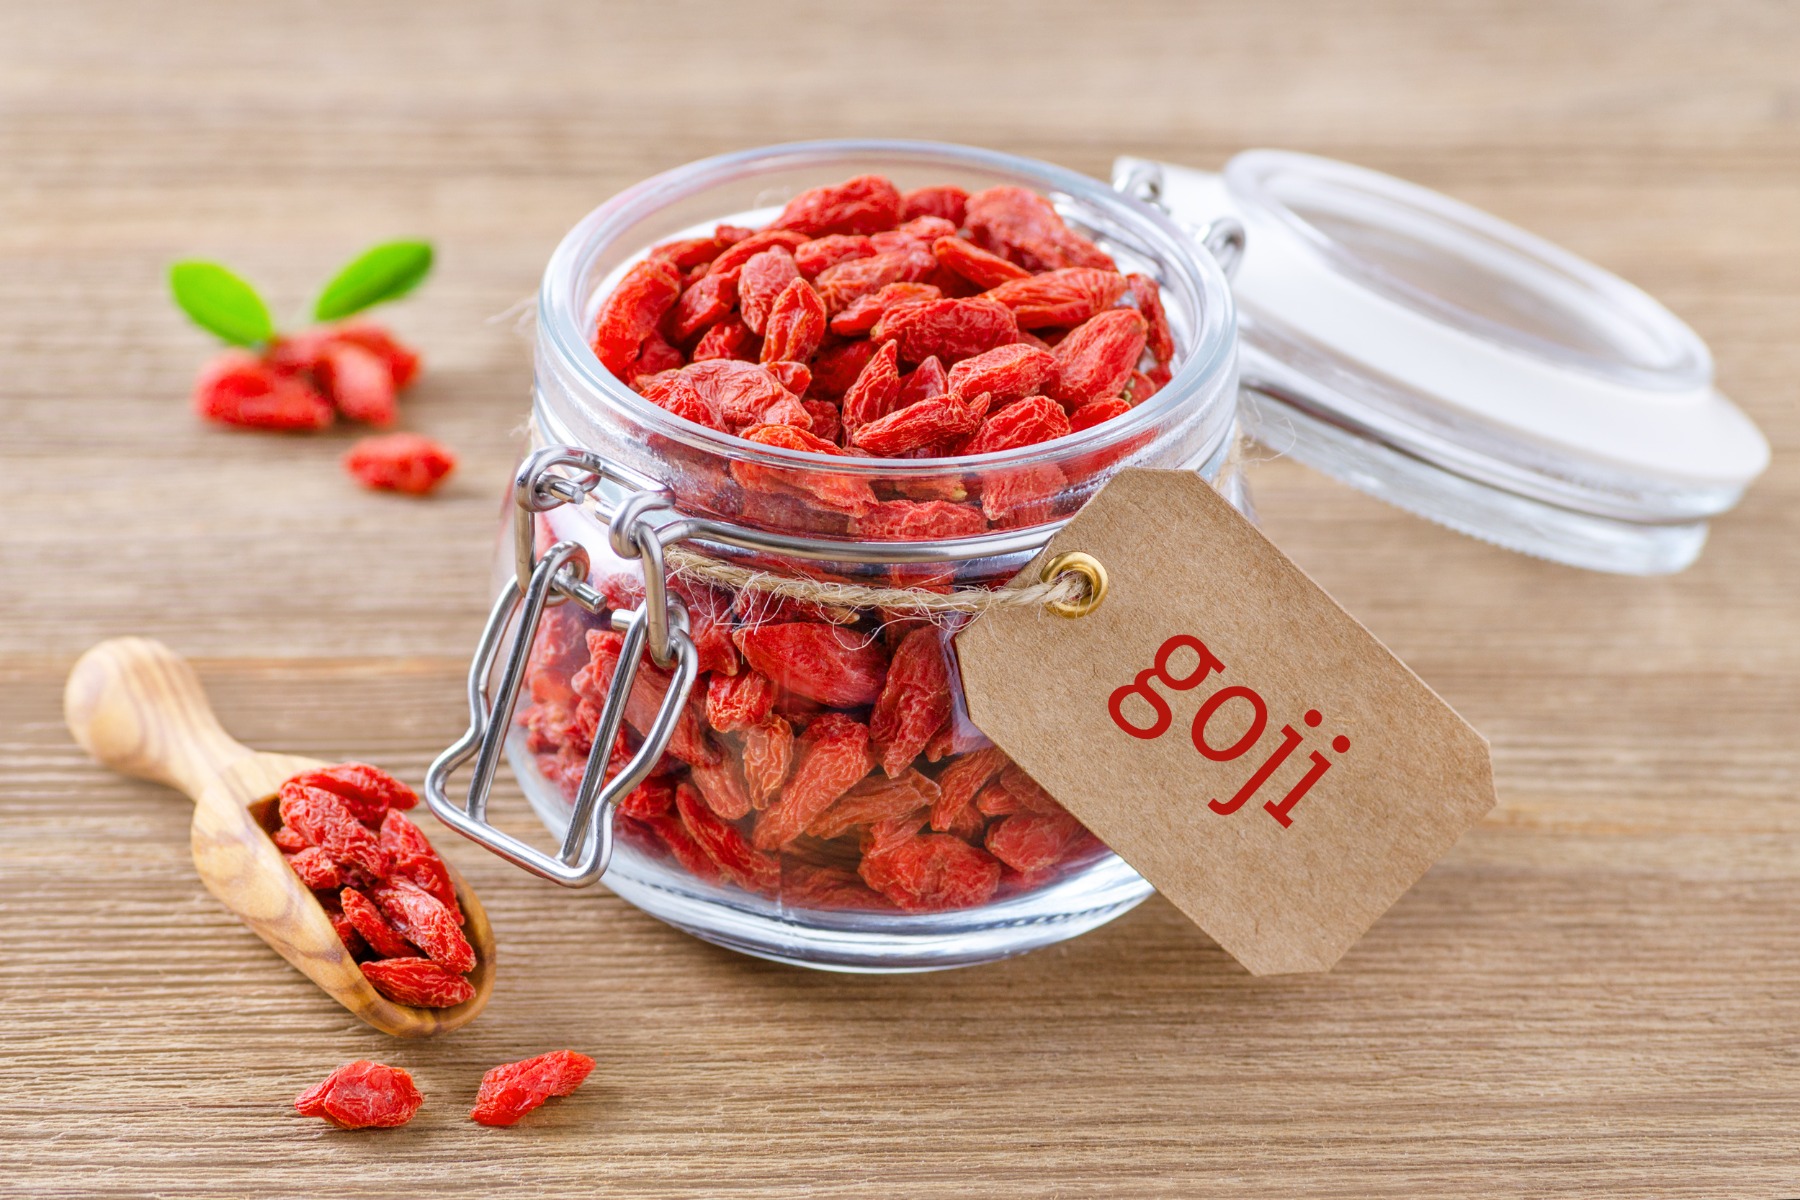 Ten Things You Should Know About Goji Berries